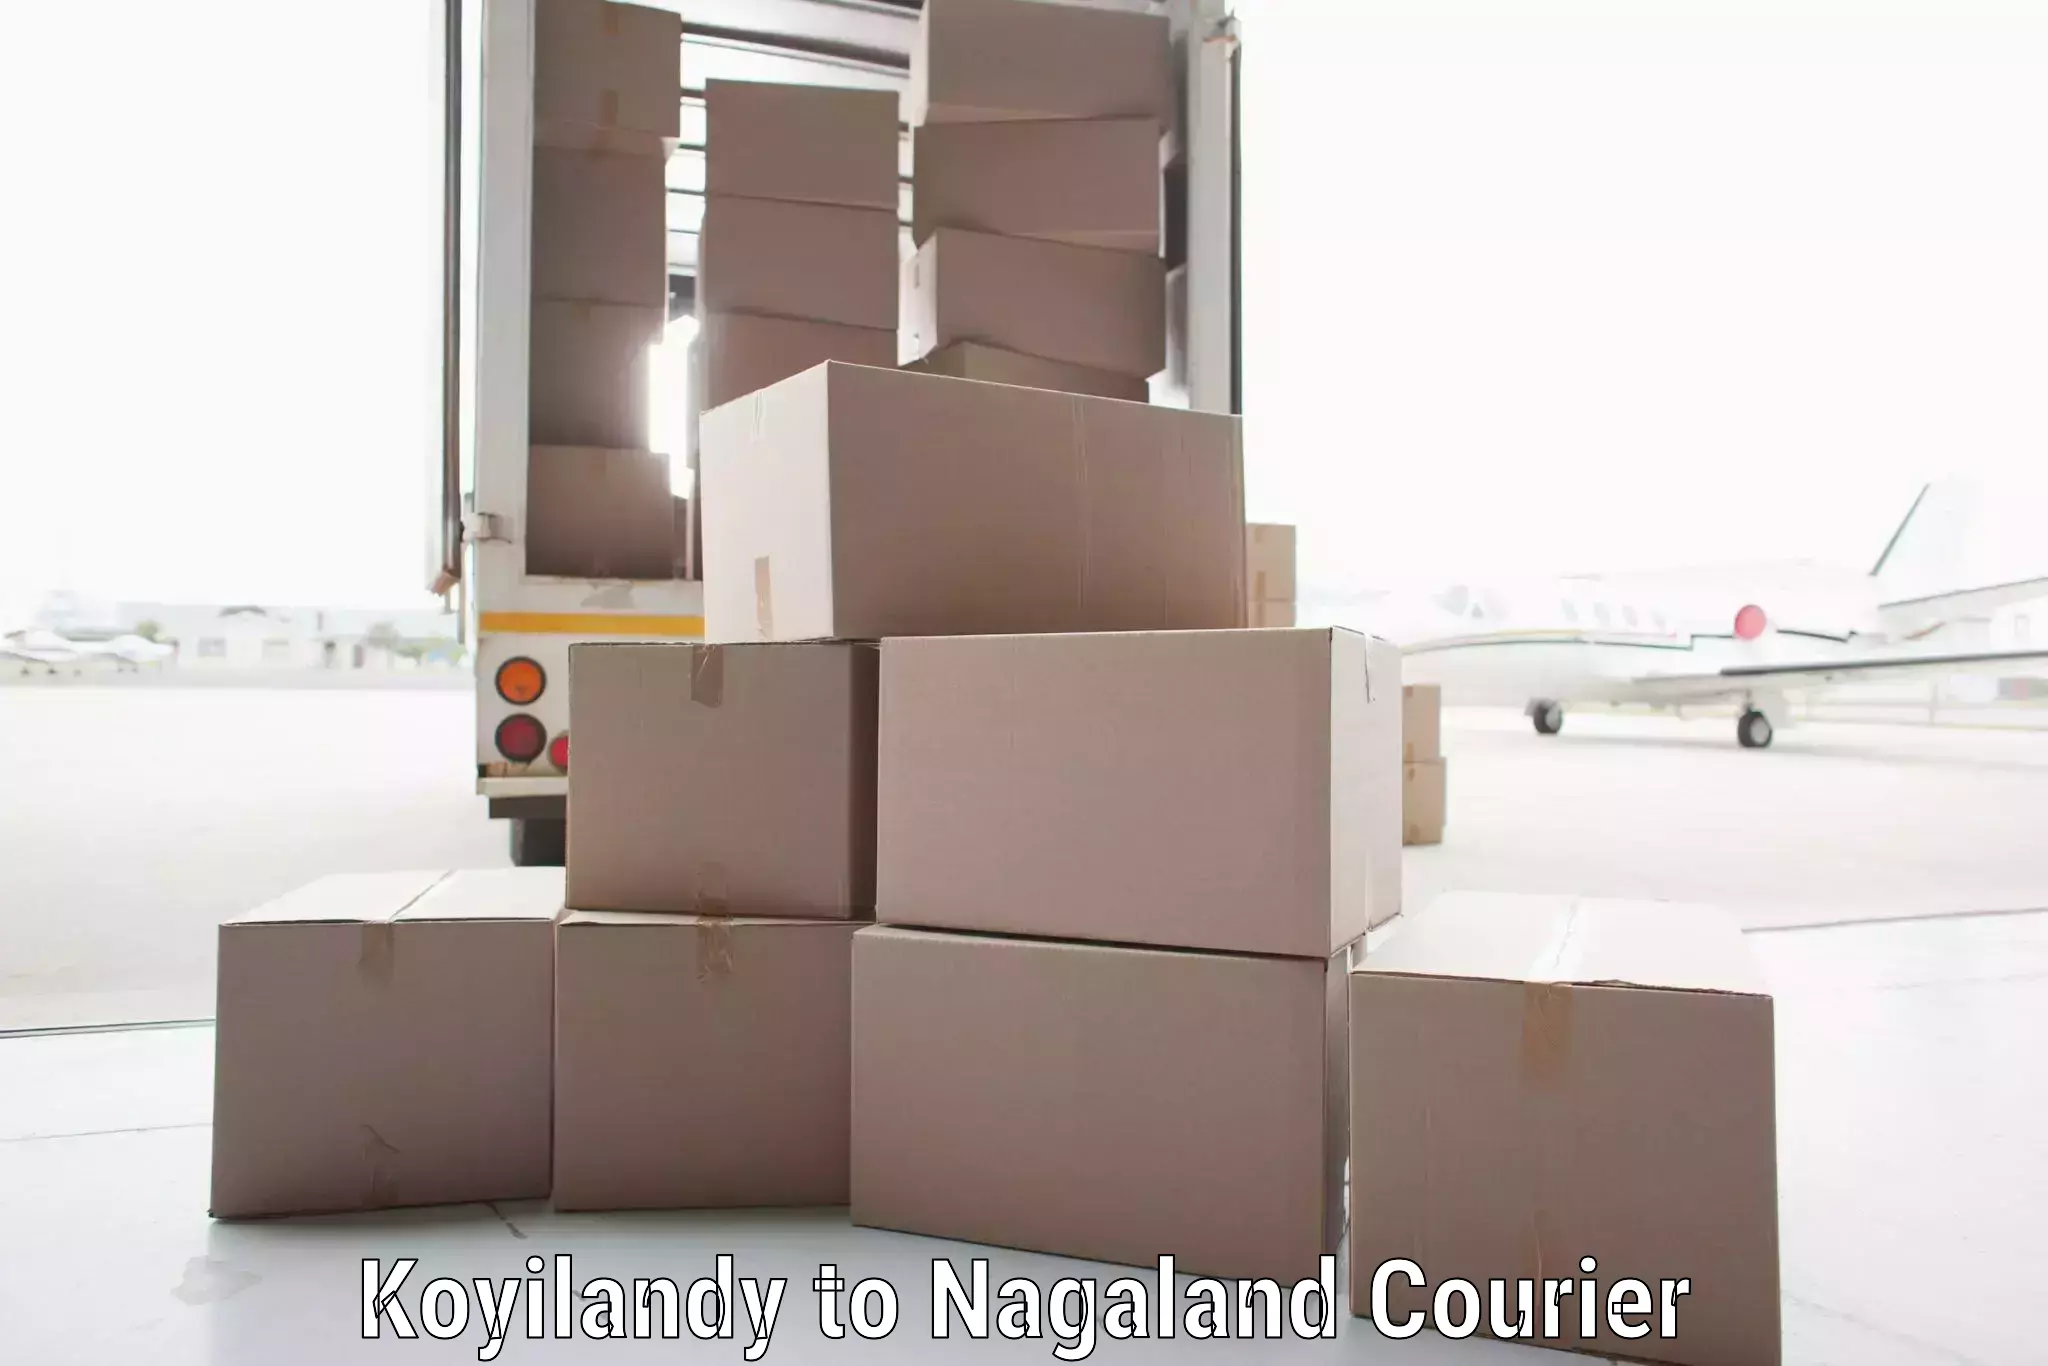 Sustainable delivery practices Koyilandy to Nagaland